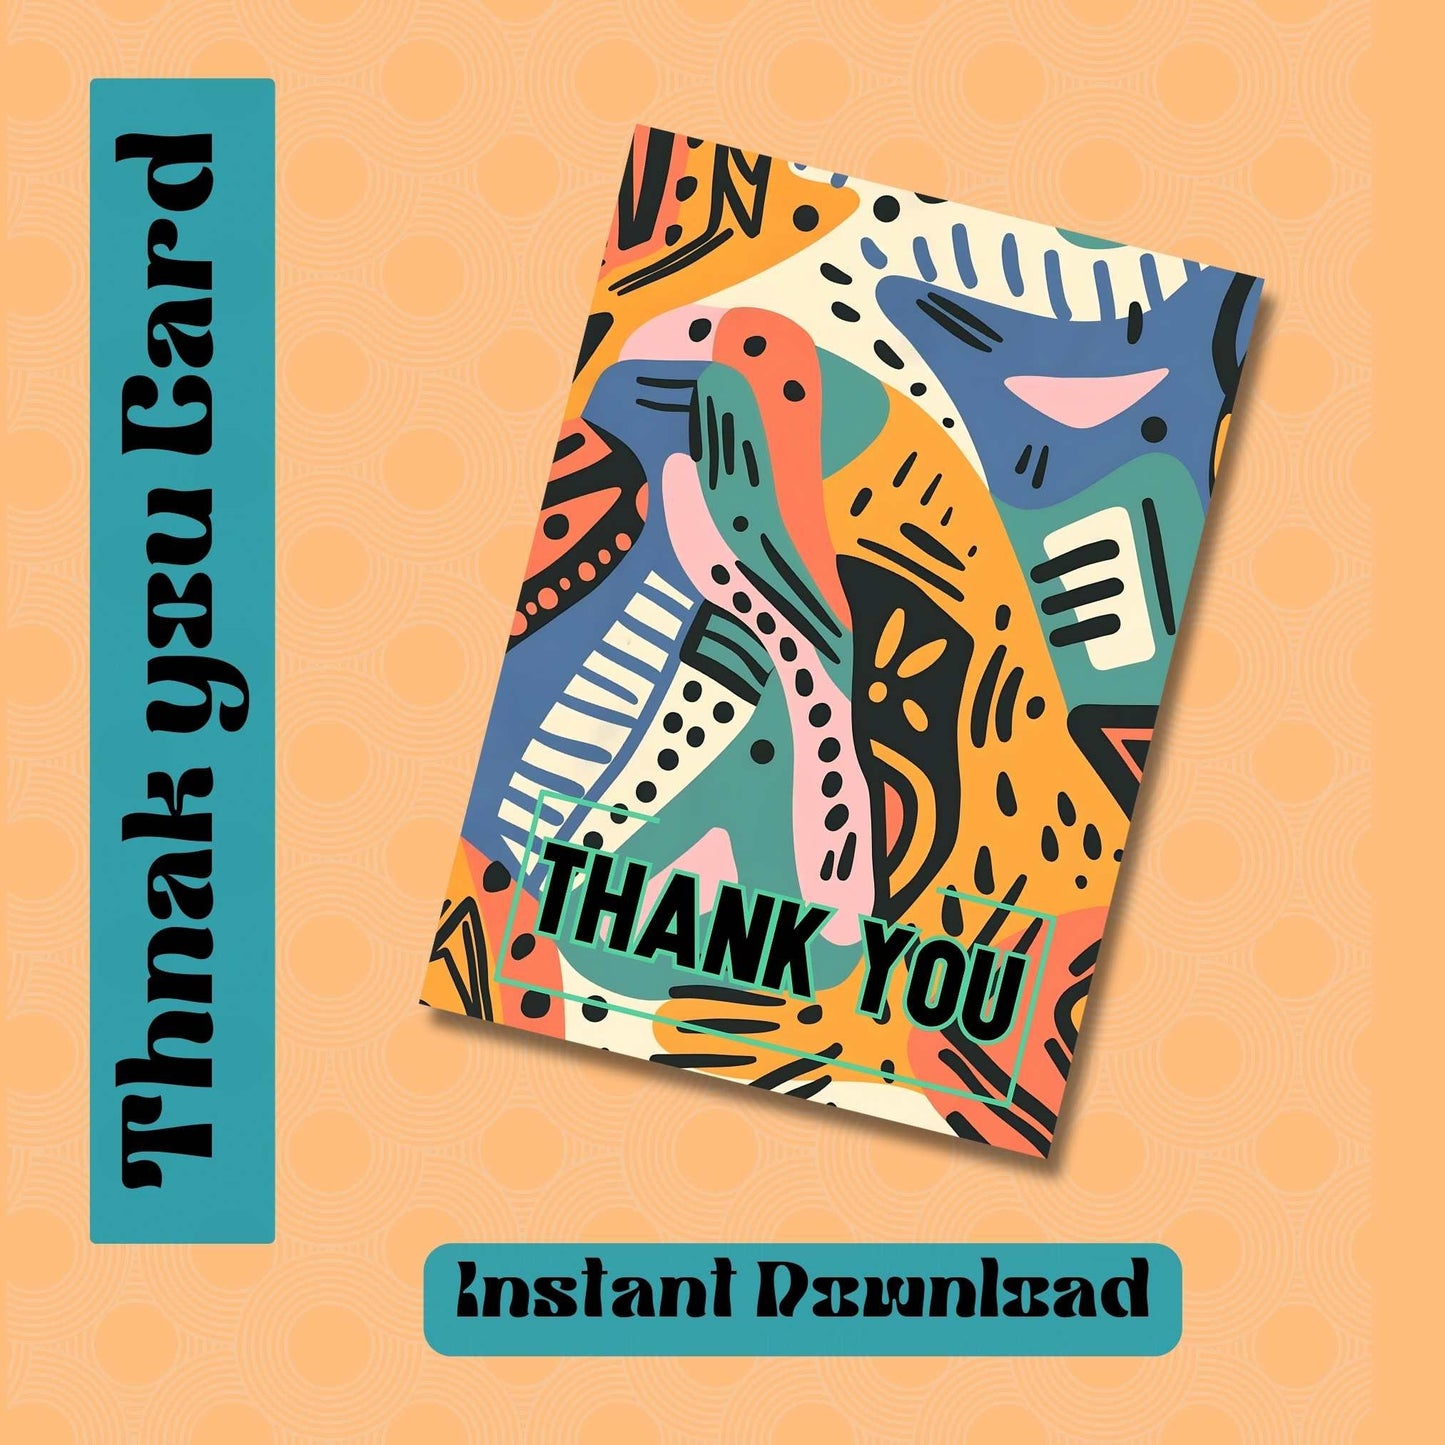 Ethnic Print Digital Download Thank You Card - Instant Printable Art - Greeting Card Decor